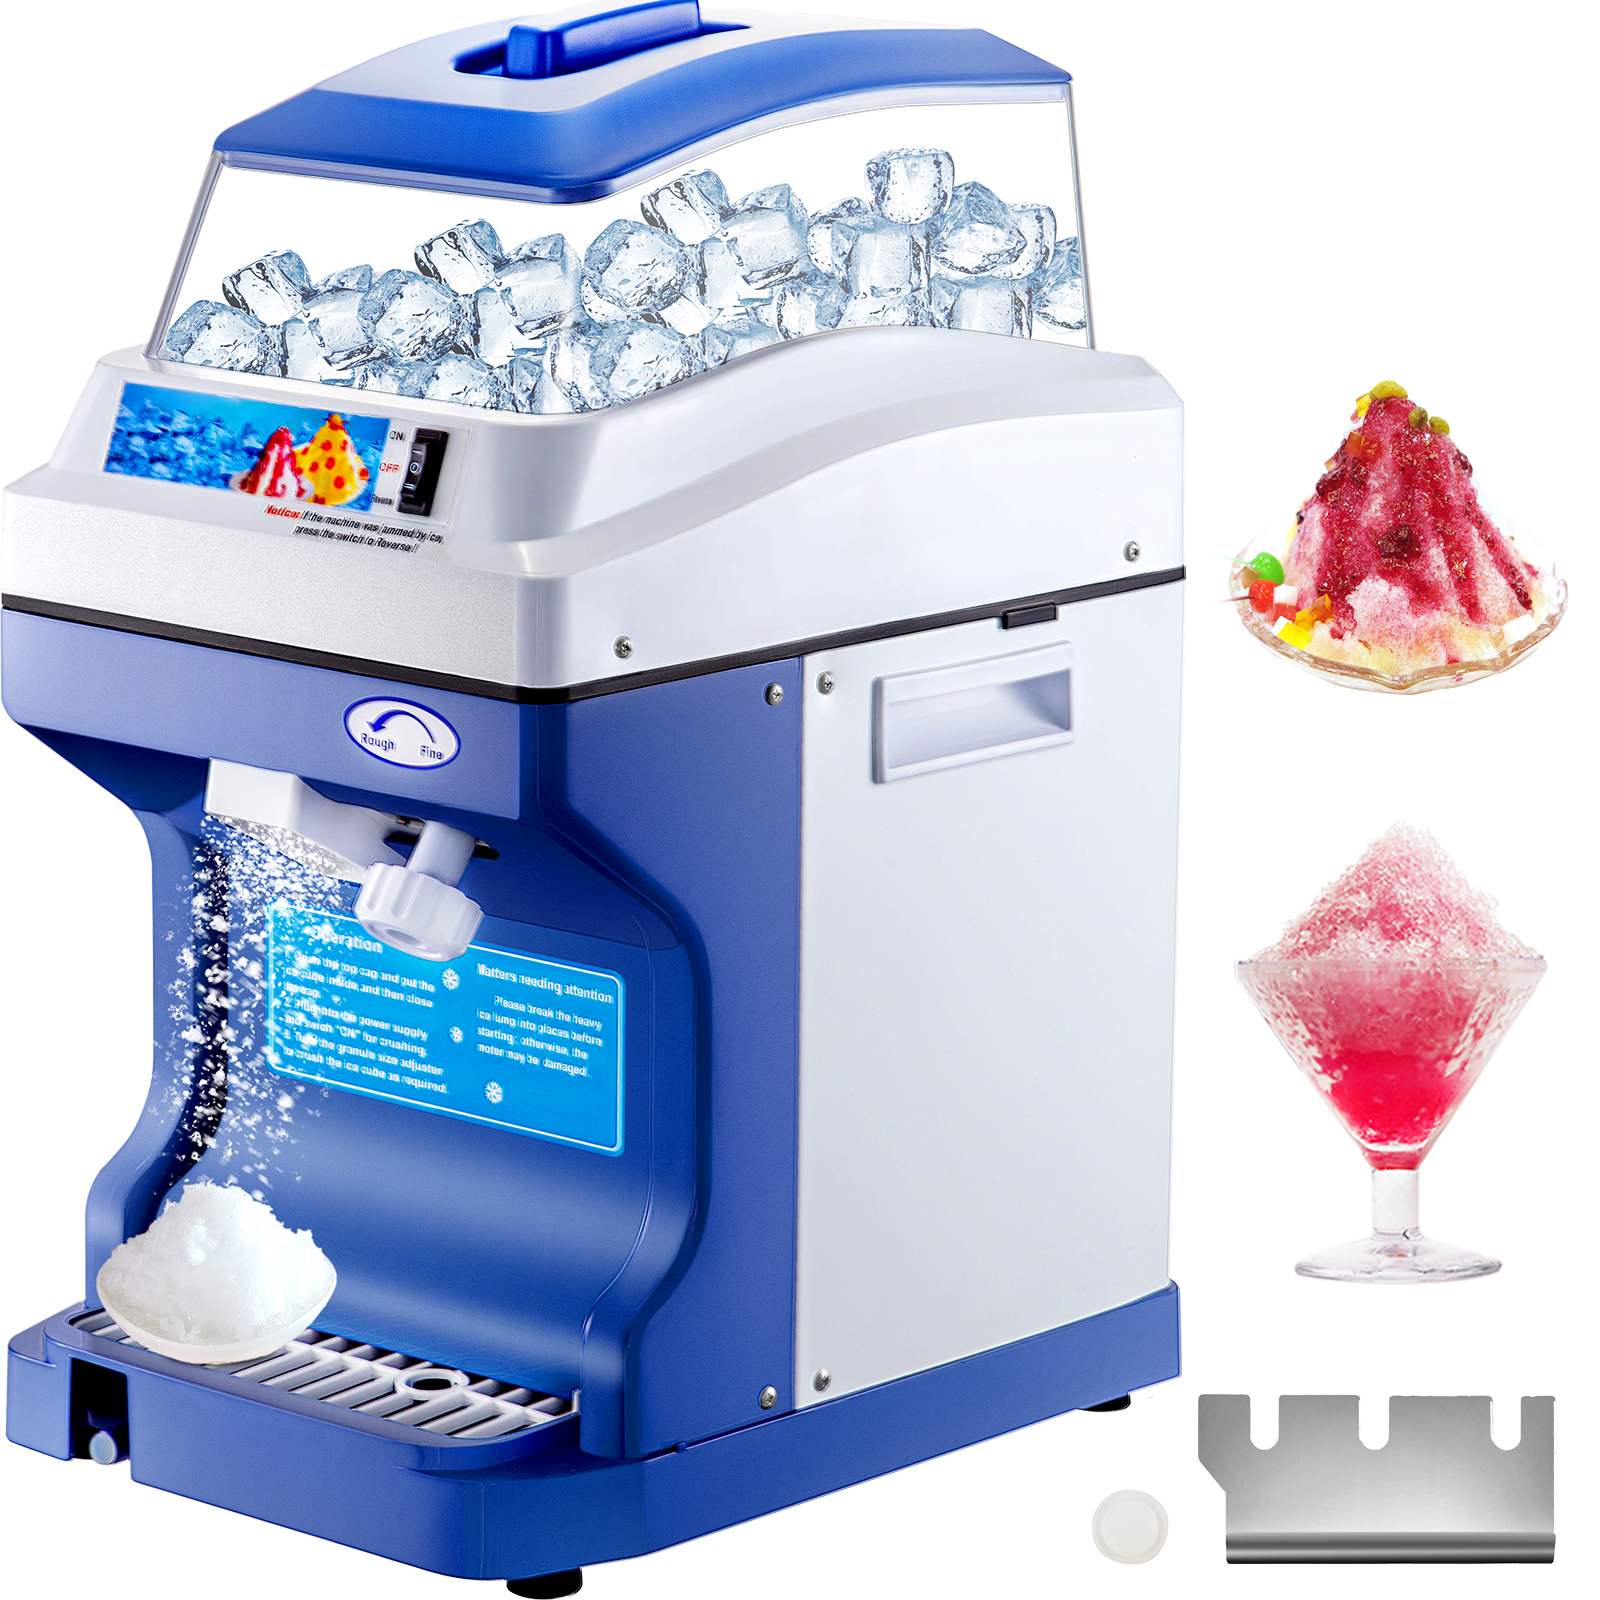 Flexzion Commercial Ice Shaver Machine 143 lbs 180W Sno Snow Cone Maker Shaved Electric Stainless Steel Blade Icee Crusher Hand Push Slice Fruit Vegetable for Party Restaurant Home Use 